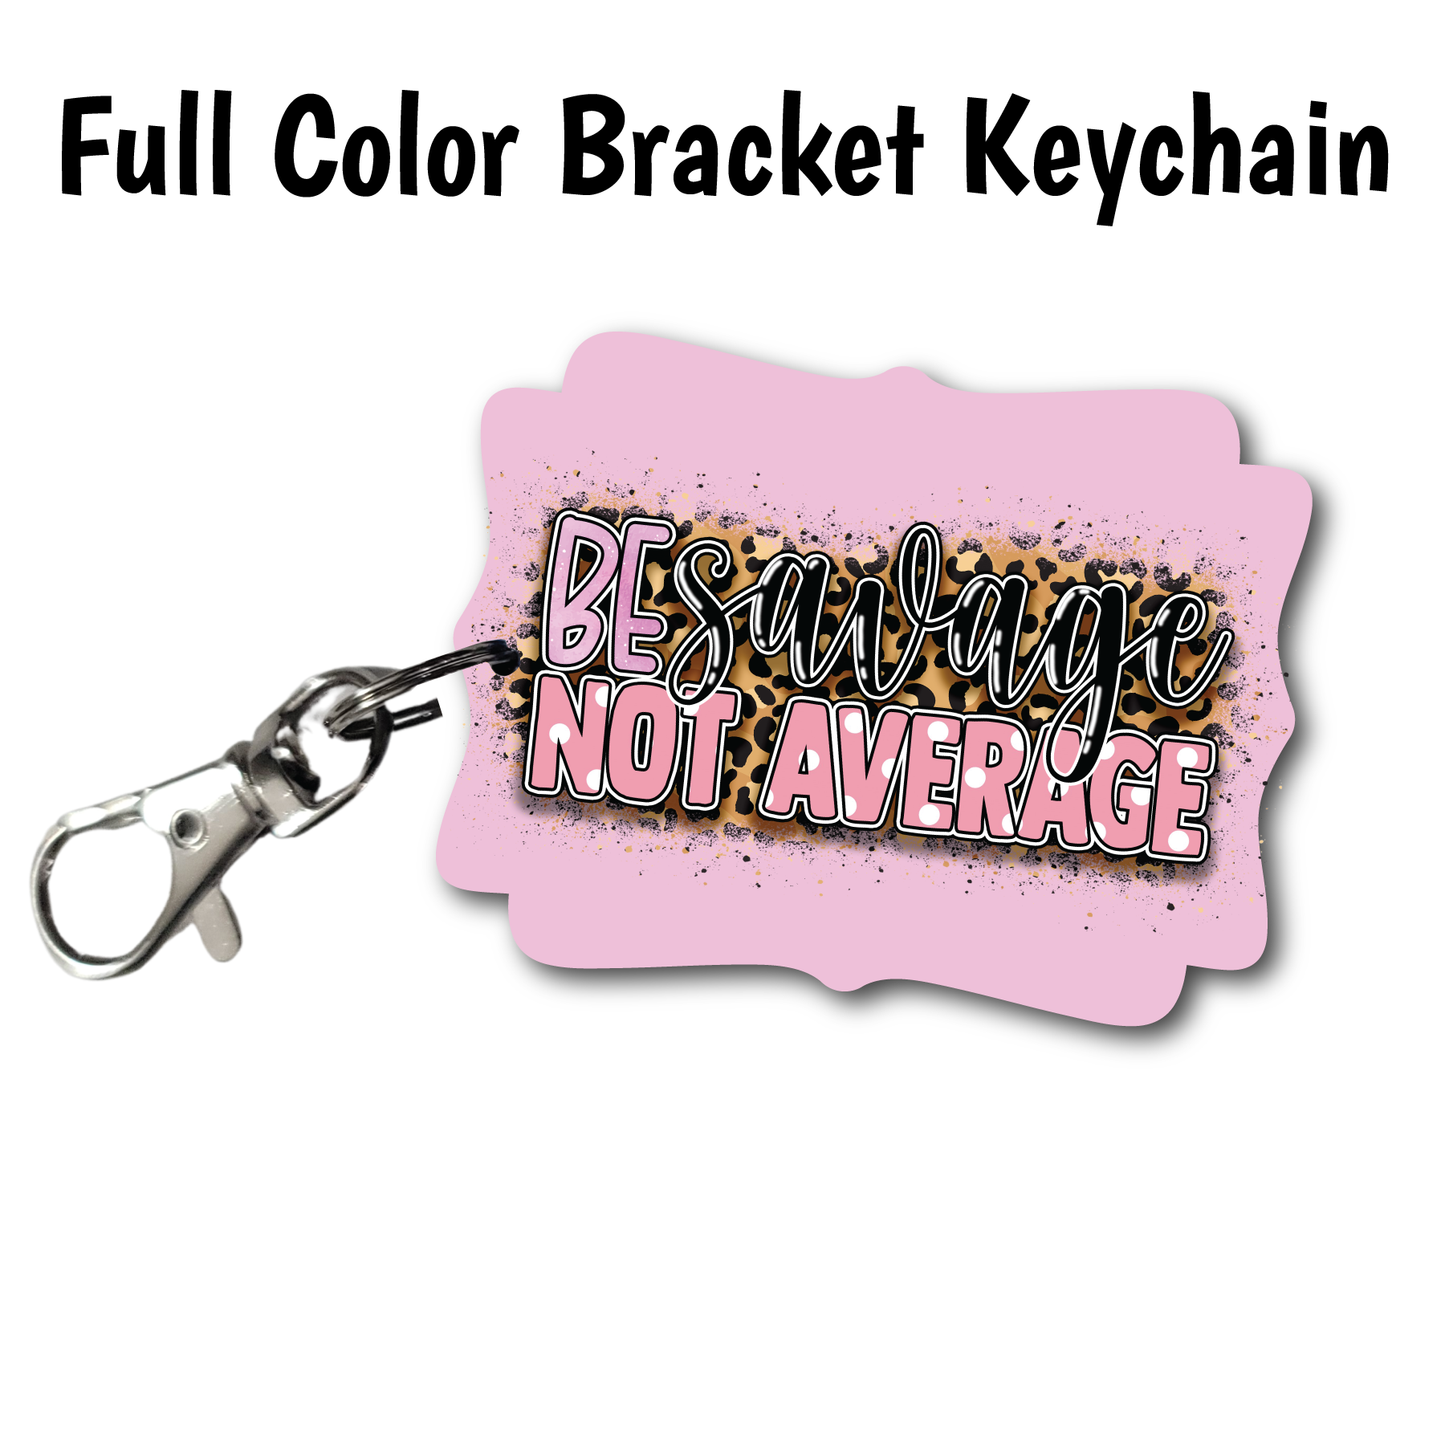 Be Savage - Full Color Keychains